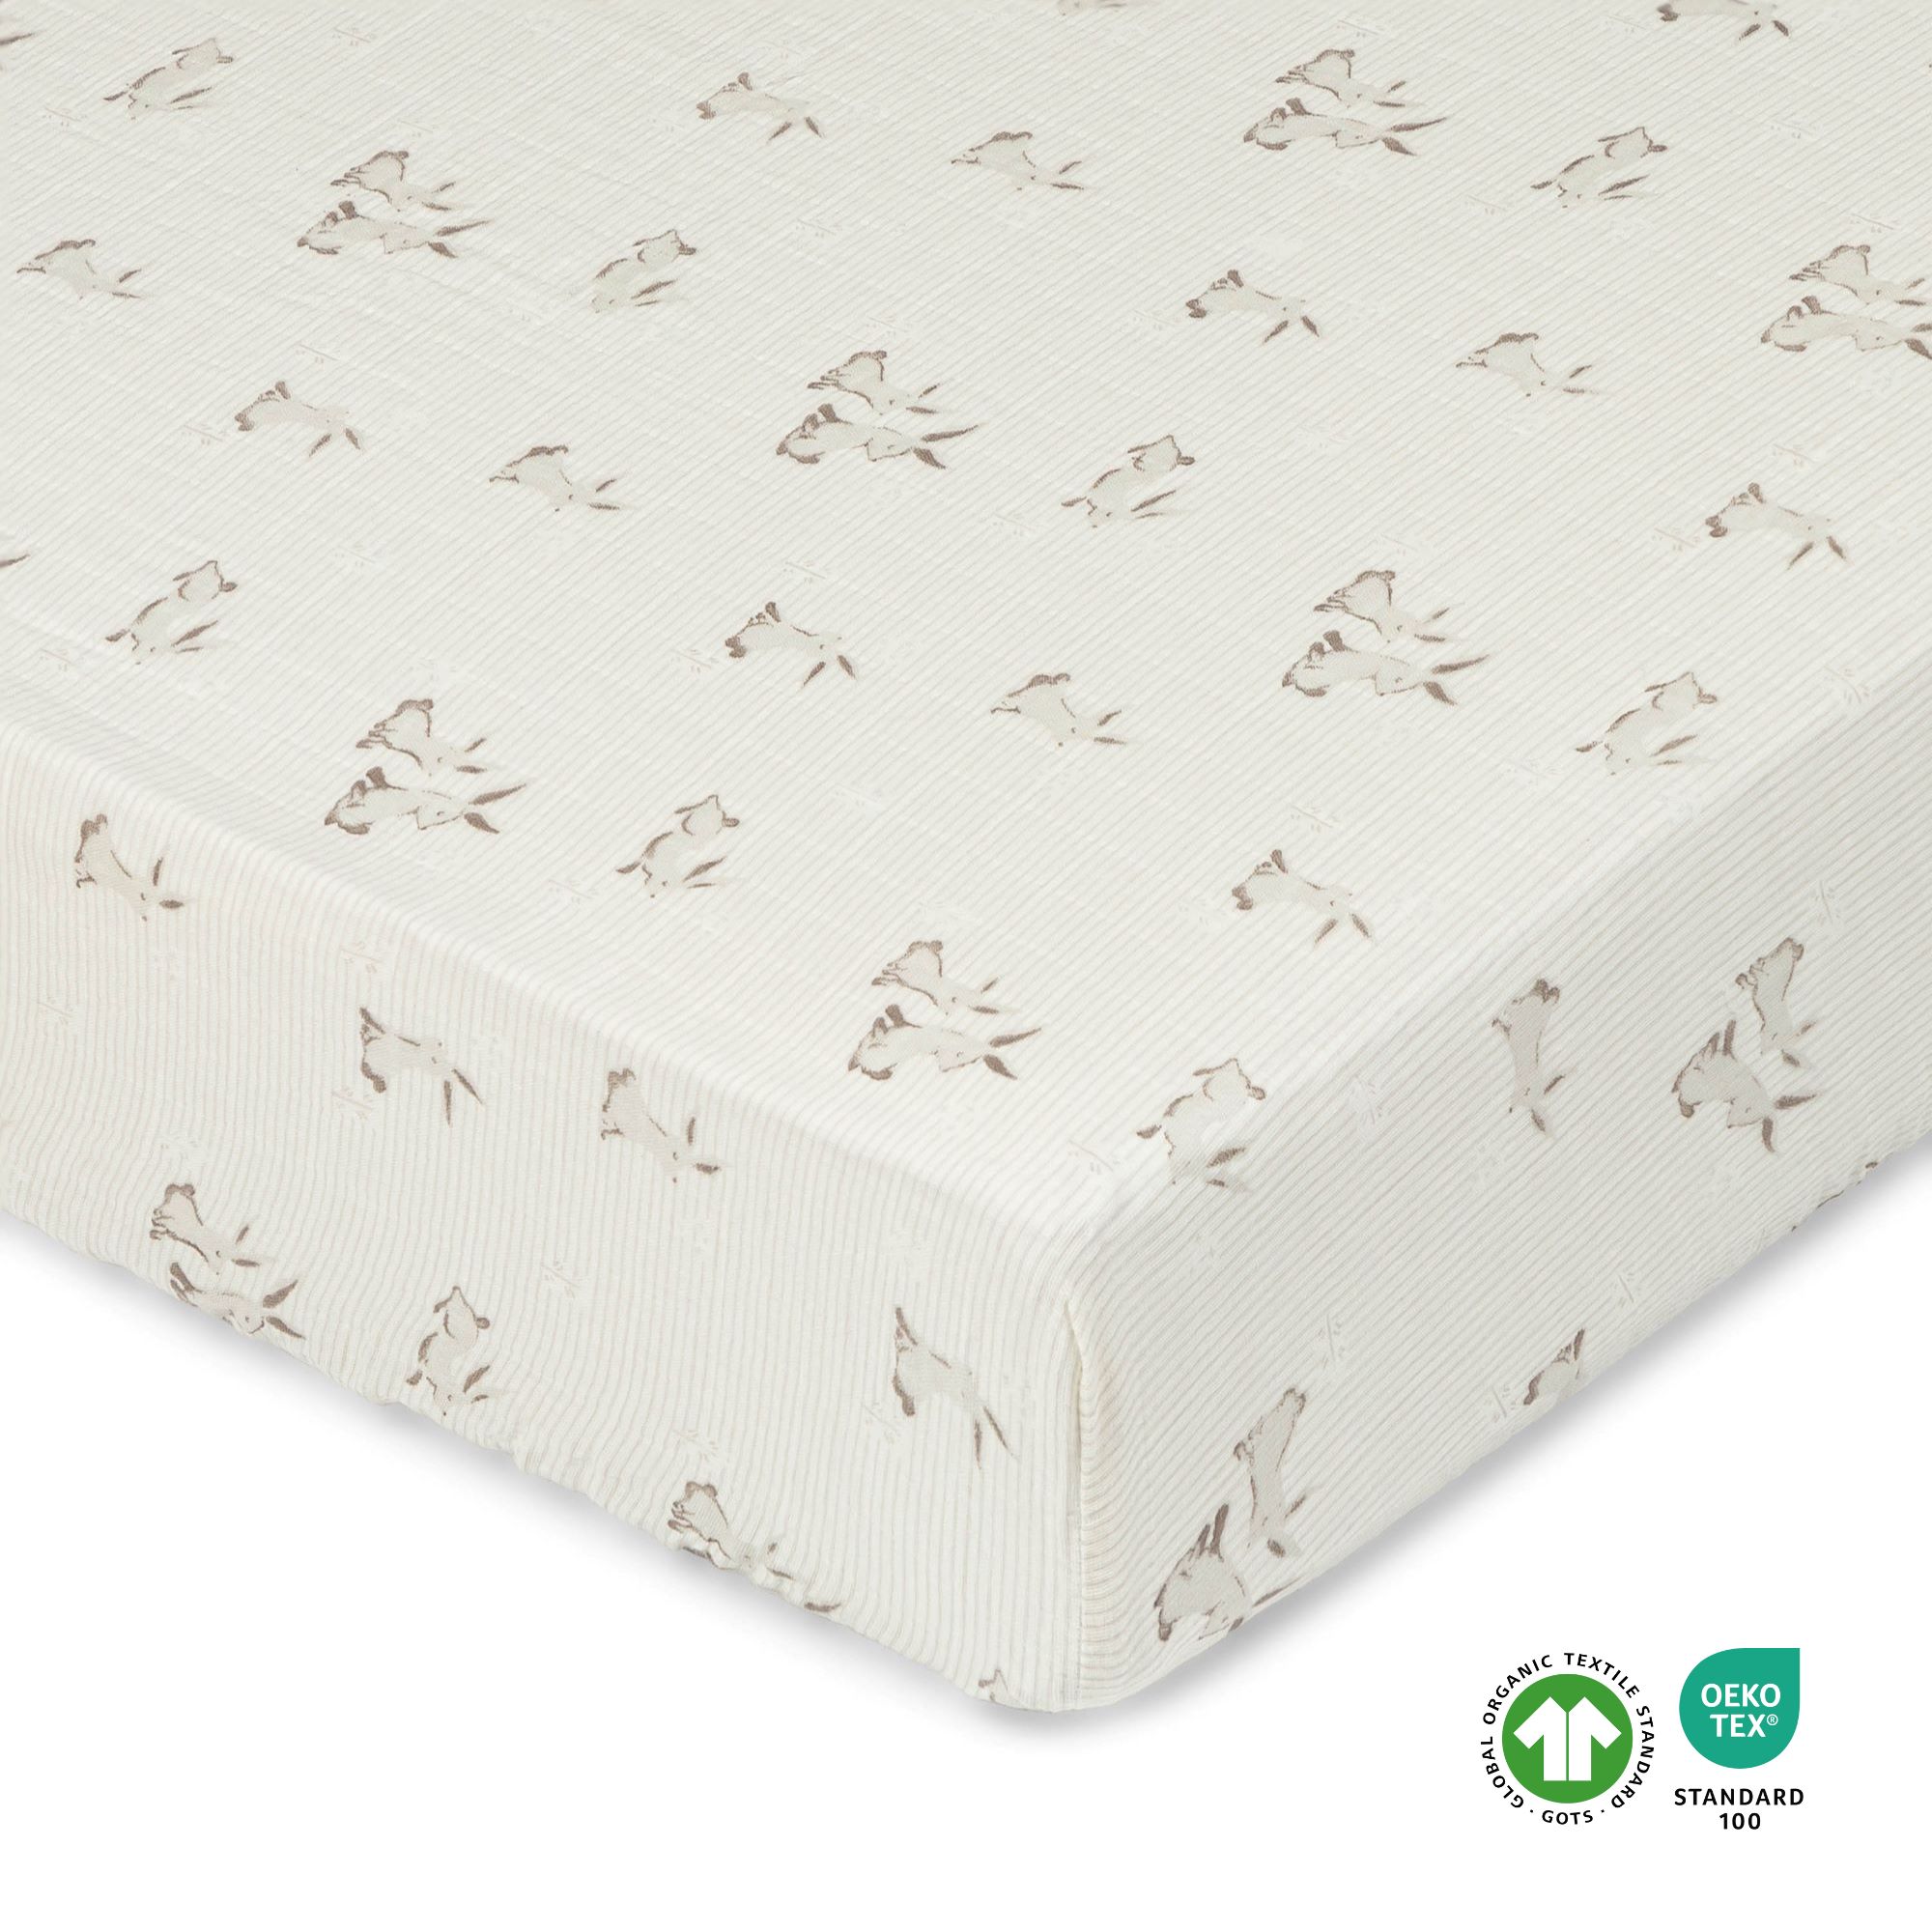 A cream colored crib sheet with bunny designs